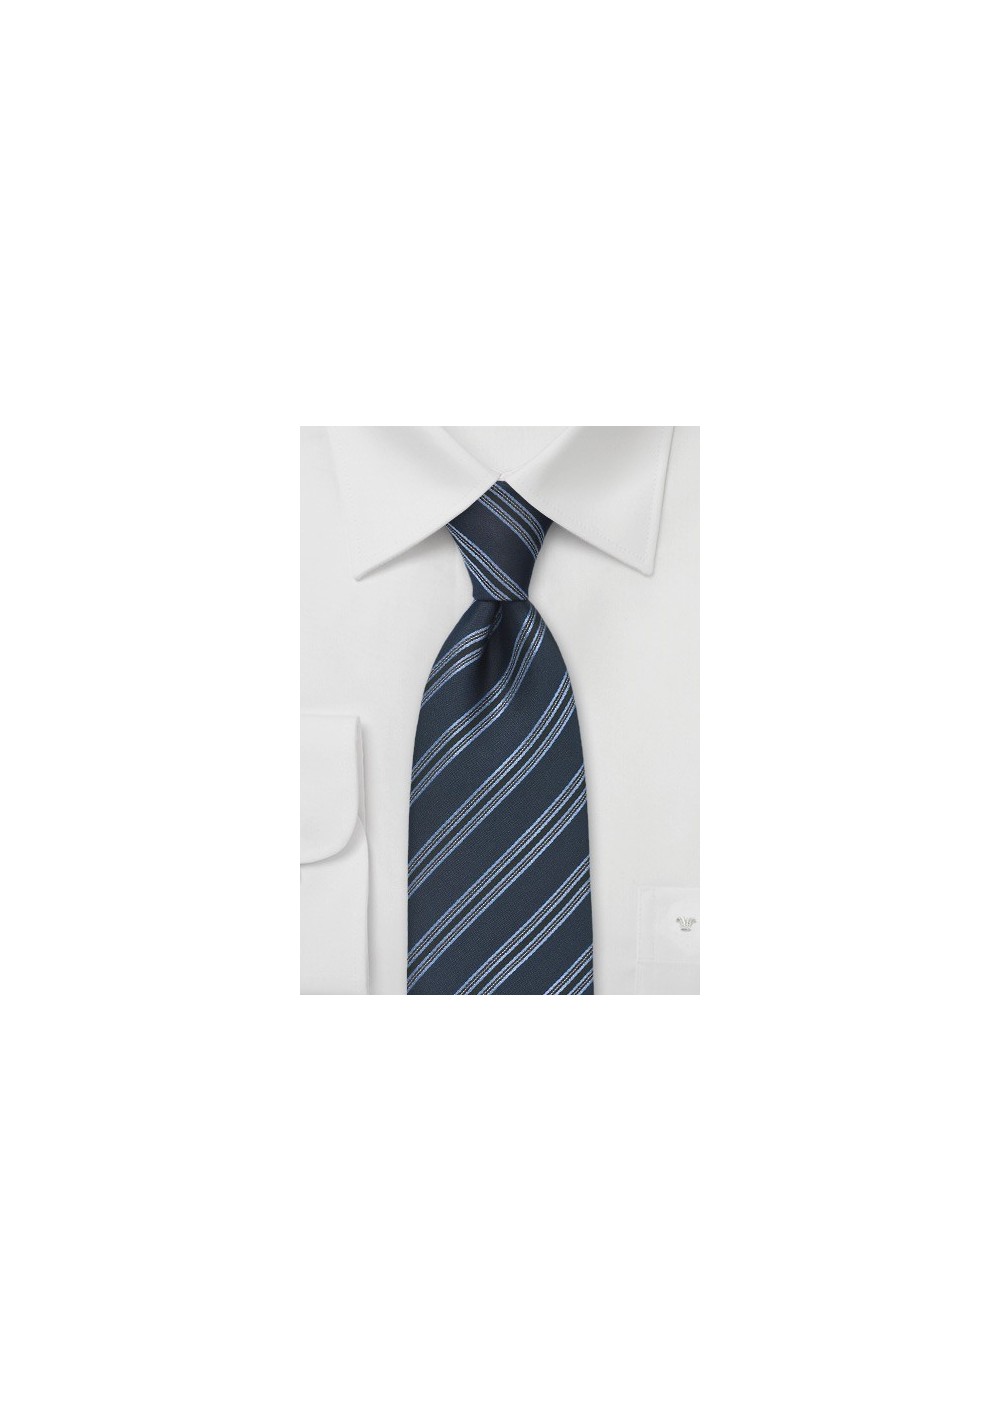 Savvy Striped Tie in Navy and Black